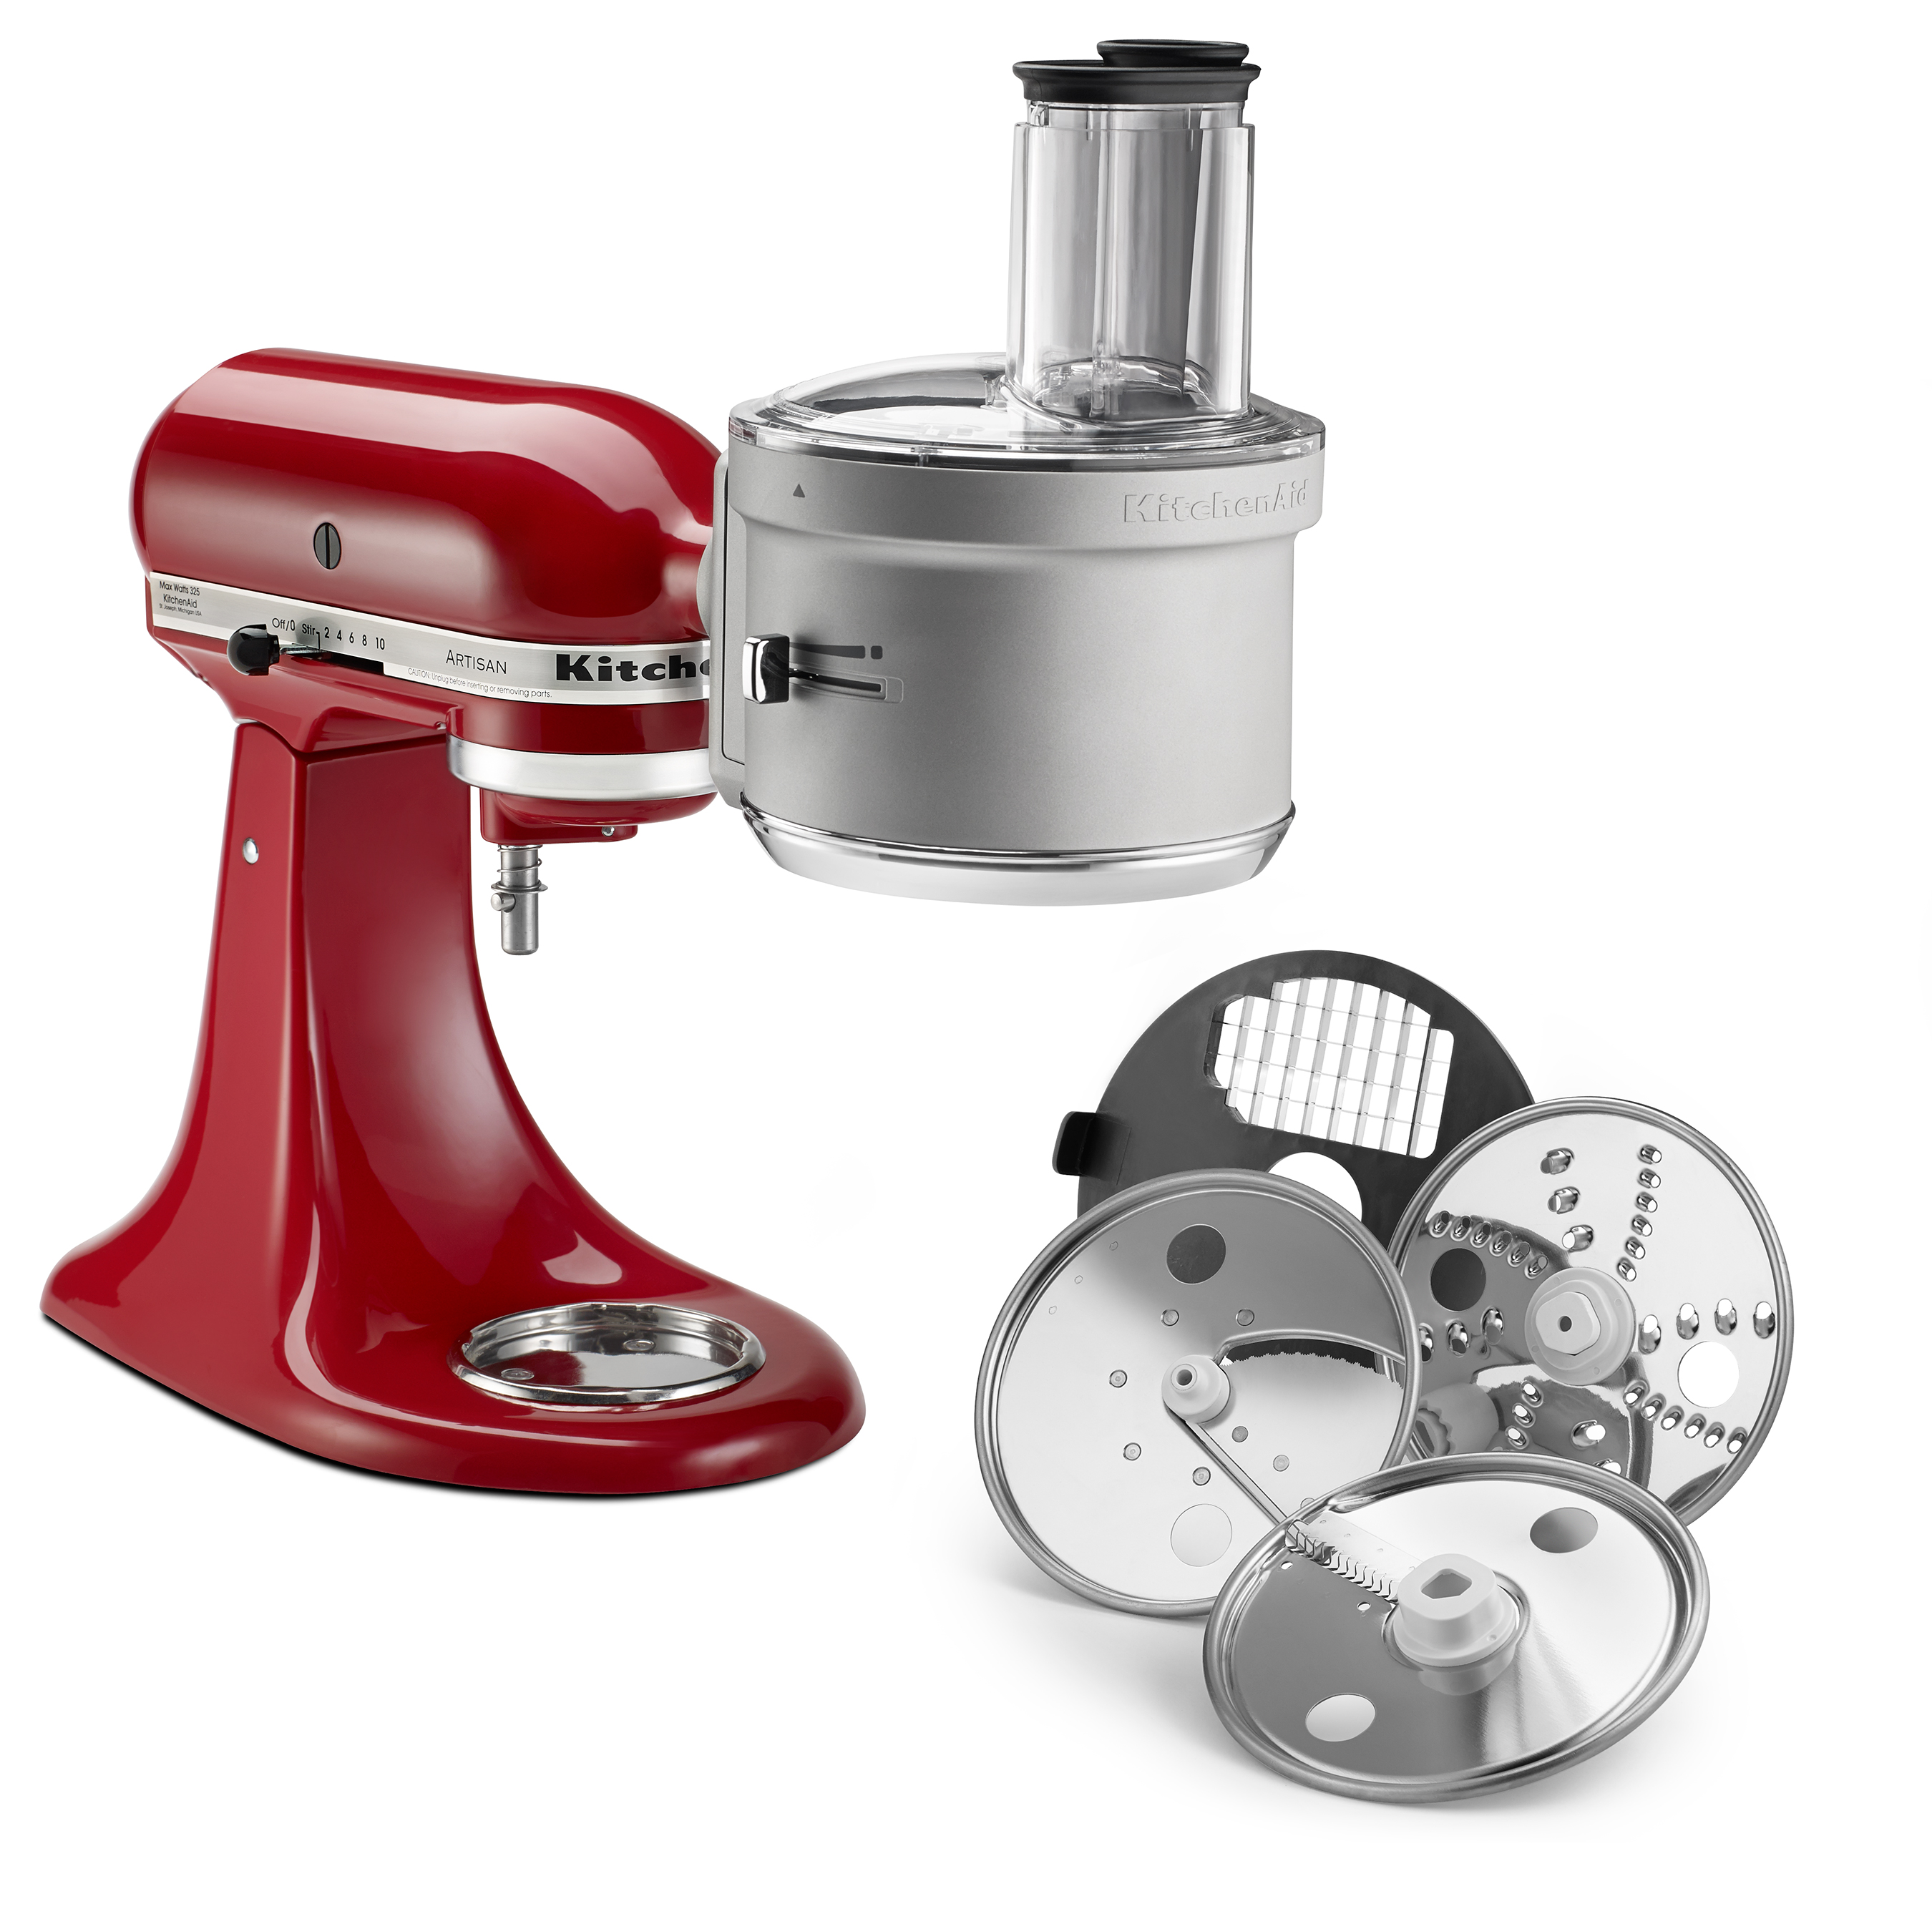 https://www.multivu.com/players/English/7282851-kitchenaid-stand-mixer-gifts-and-attachments/gallery//image/d6d2f6be-3f54-4cec-b4fe-b95f8bbc31fb.HR.jpg